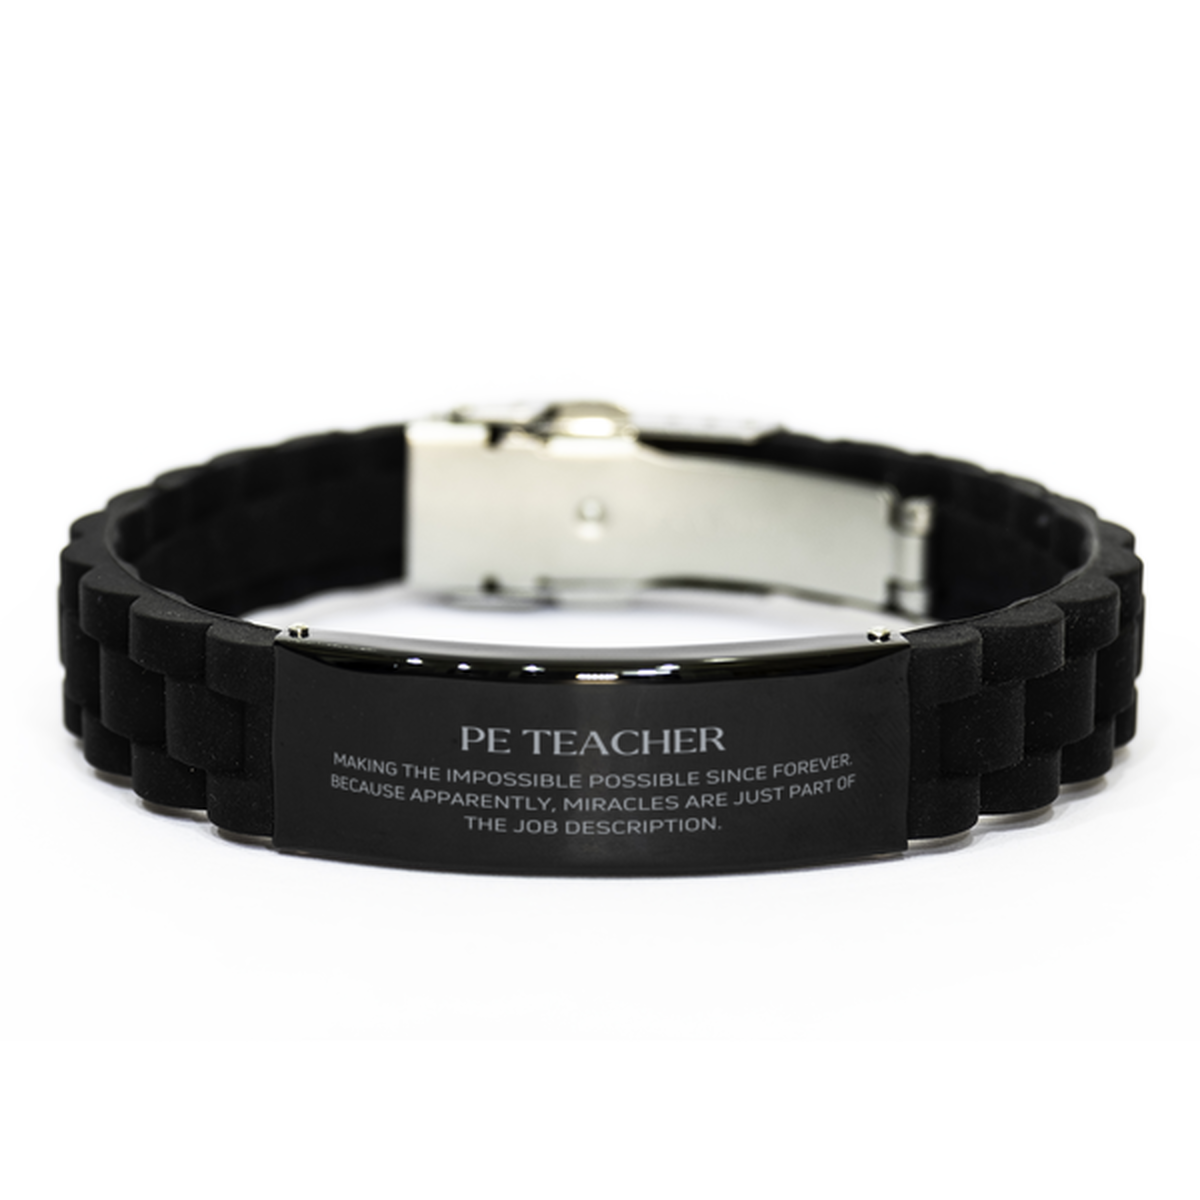 Funny PE Teacher Gifts, Miracles are just part of the job description, Inspirational Birthday Black Glidelock Clasp Bracelet For PE Teacher, Men, Women, Coworkers, Friends, Boss